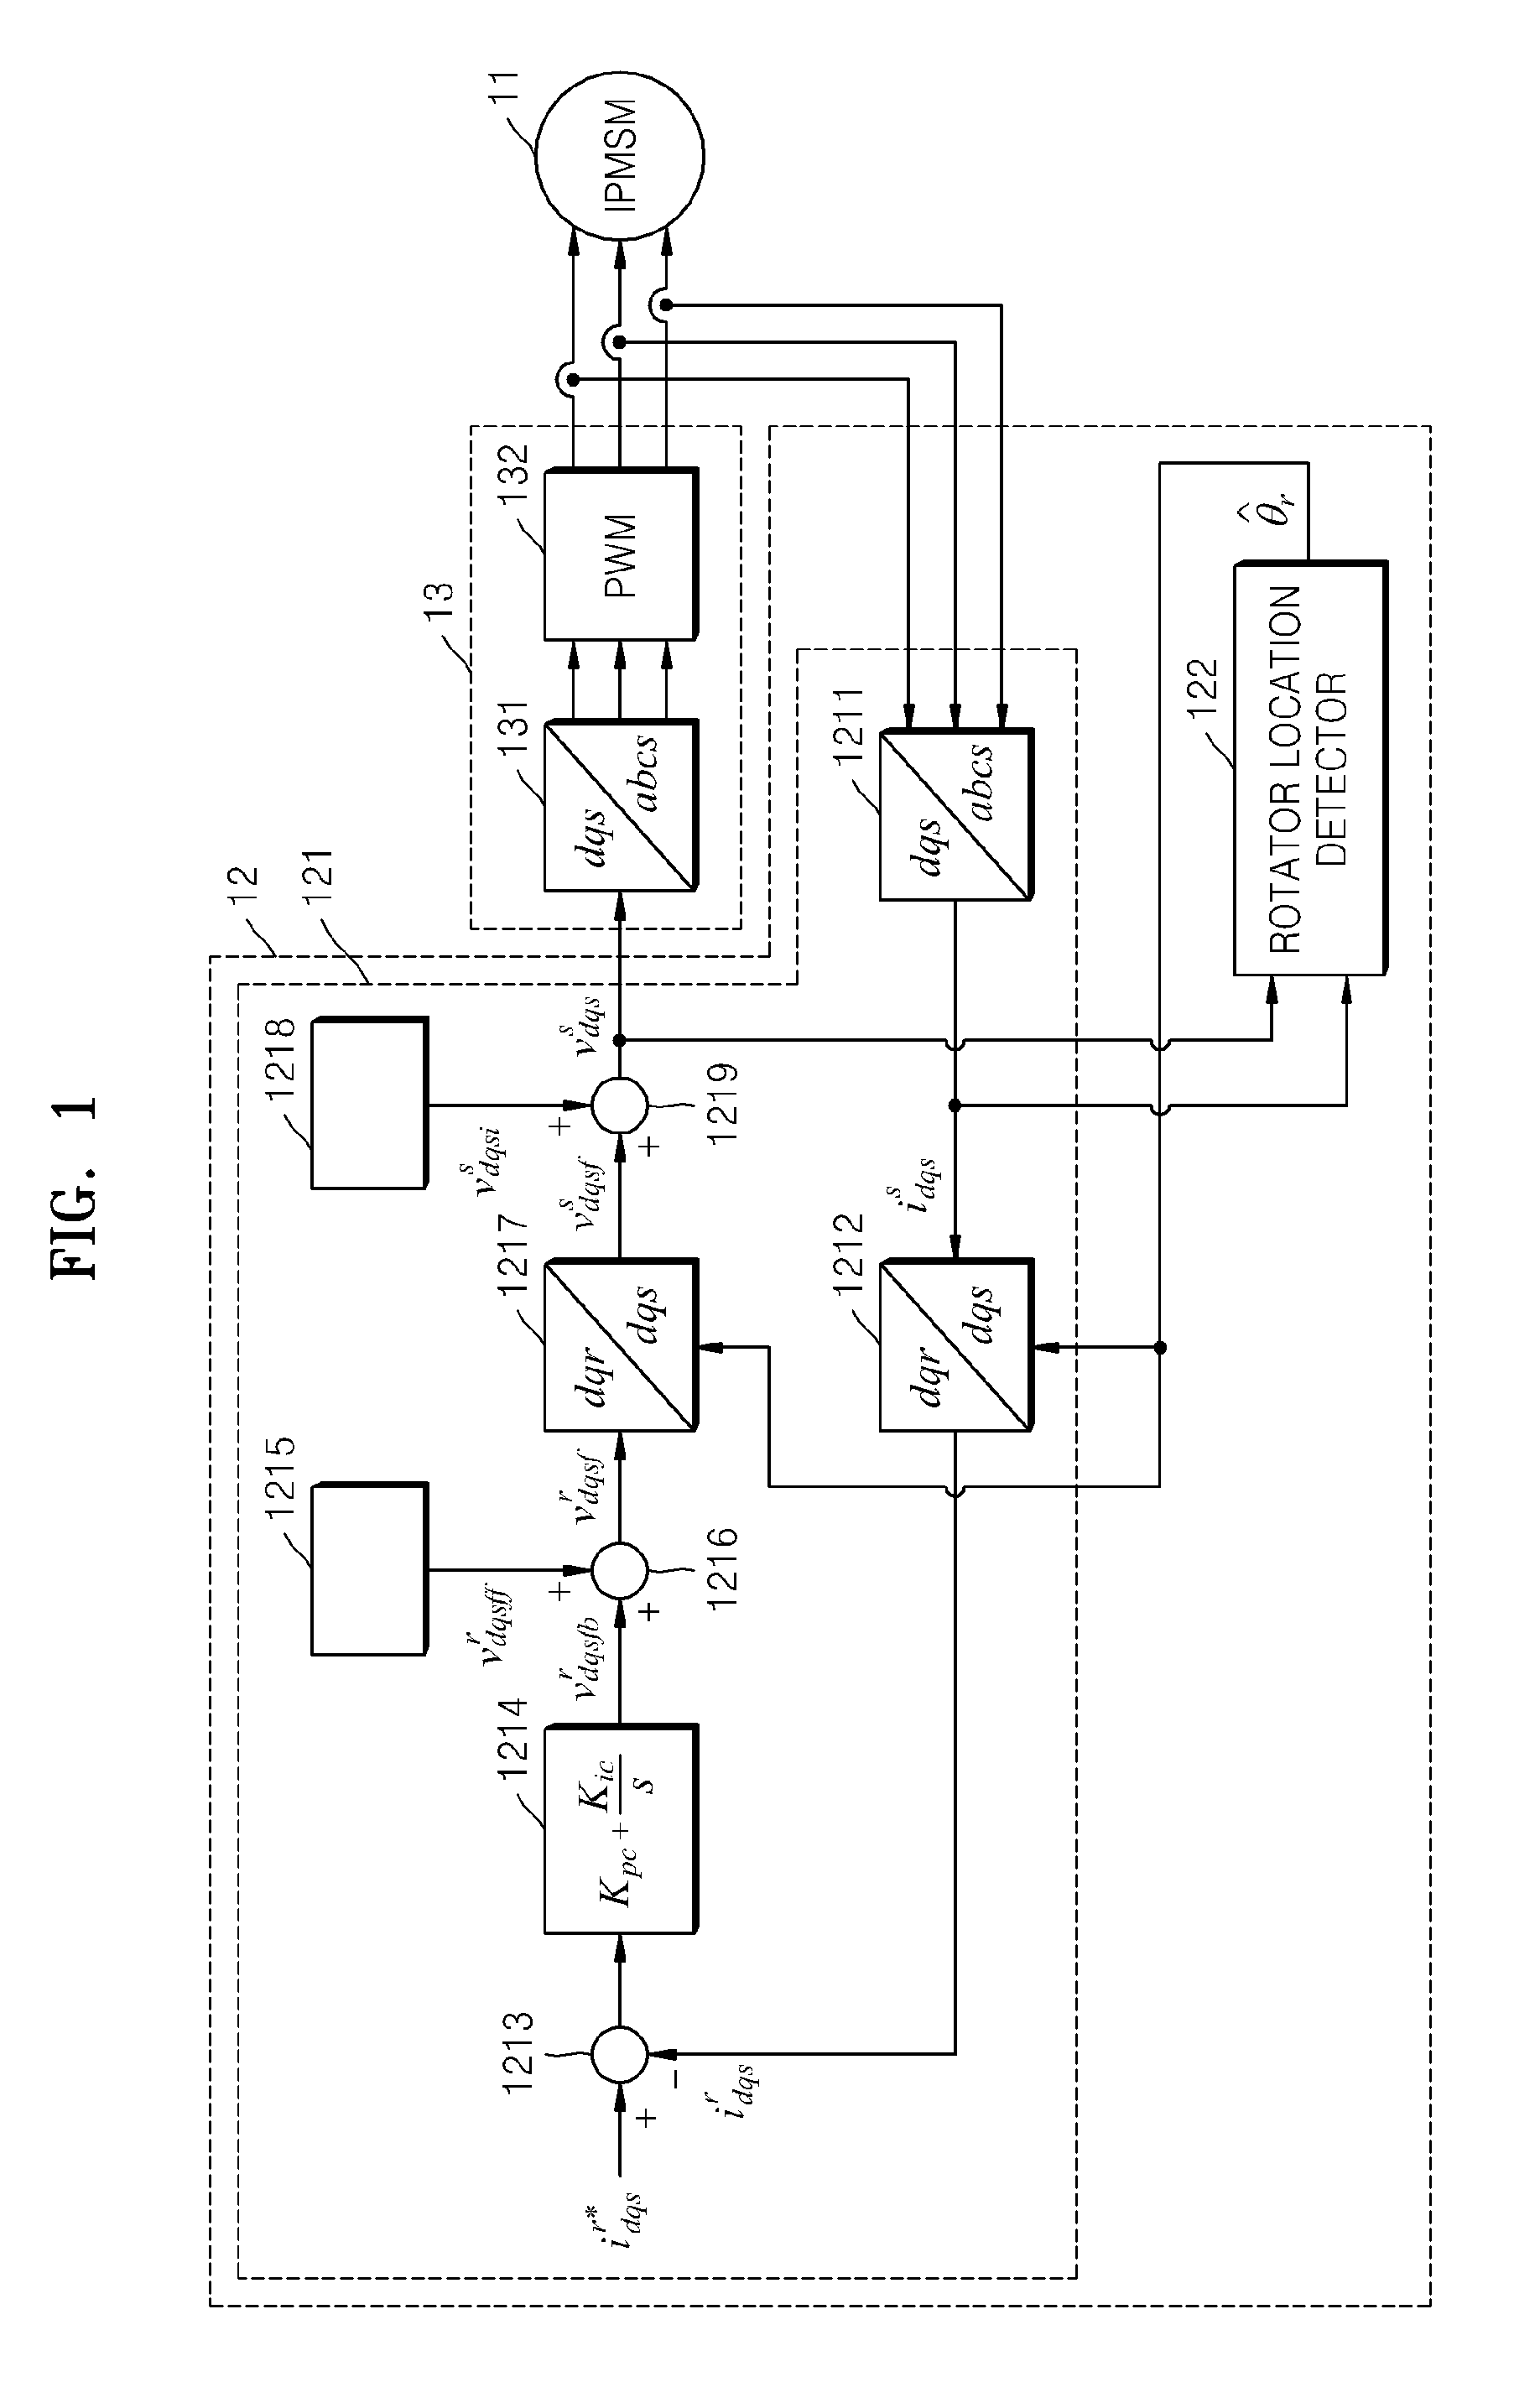 Method and apparatus for driving alternating-current motor